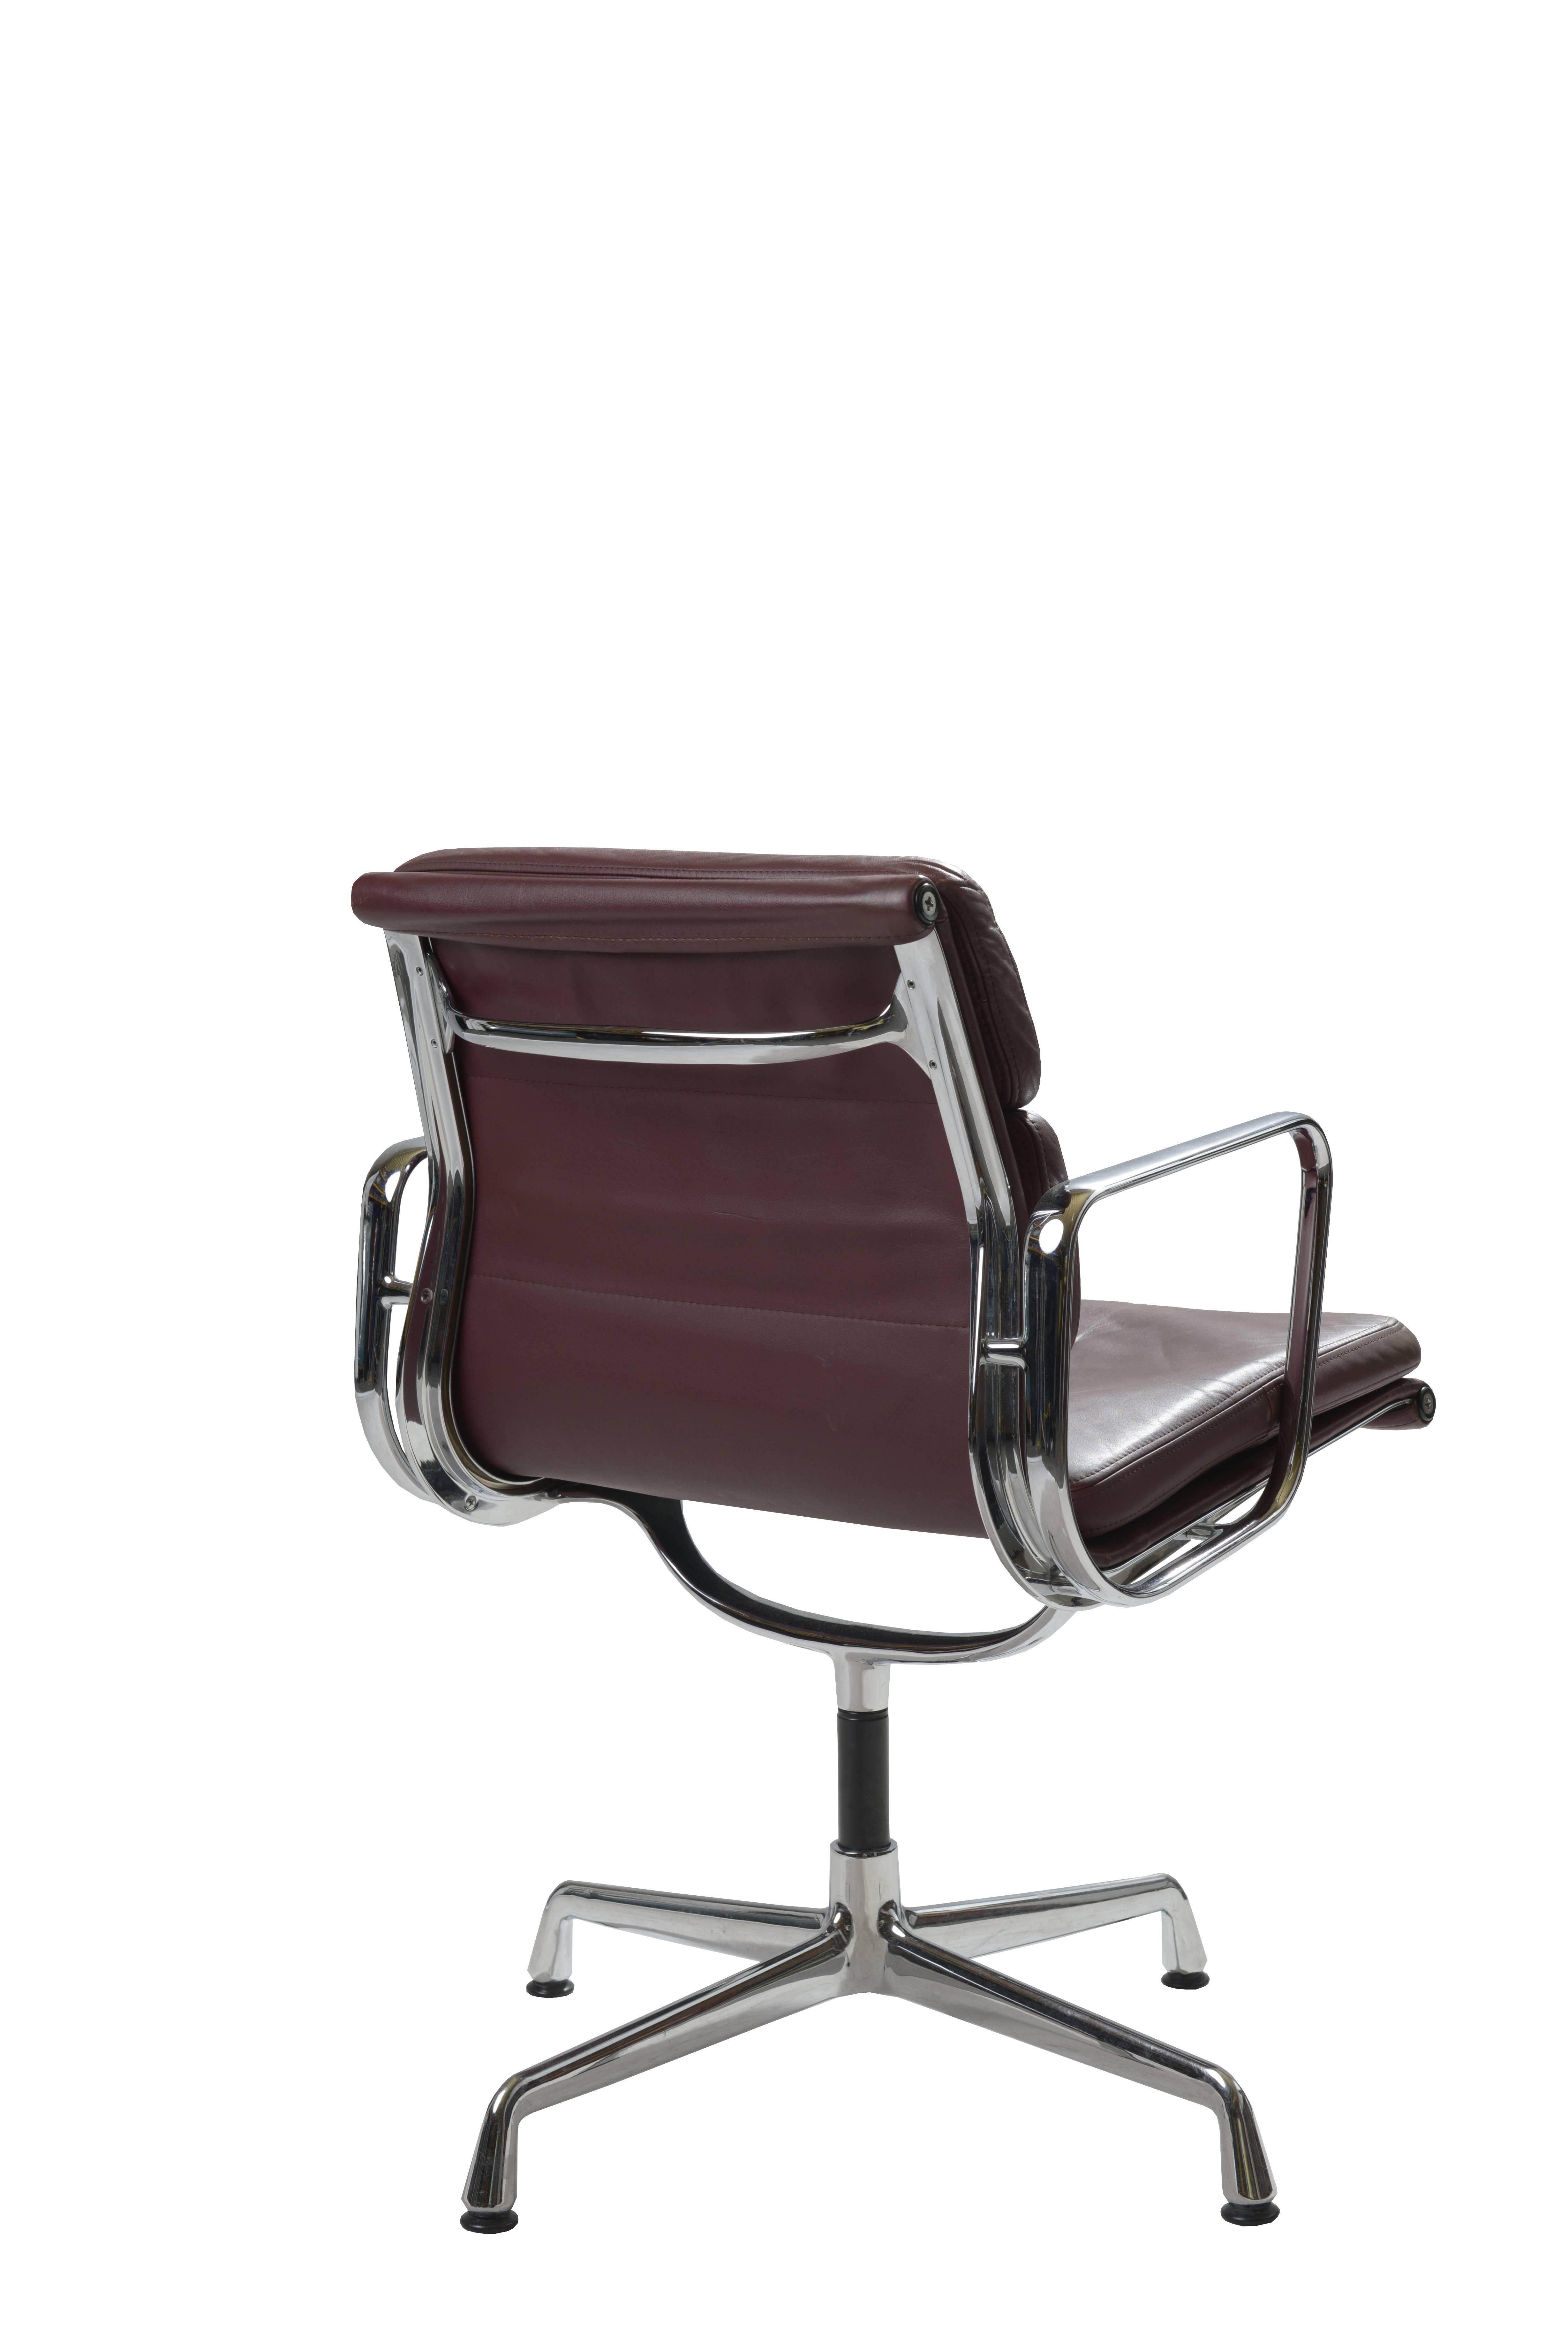 American Charles & Ray Eames EA 208 Leather and Chrome Low Back Soft Pad Chairs